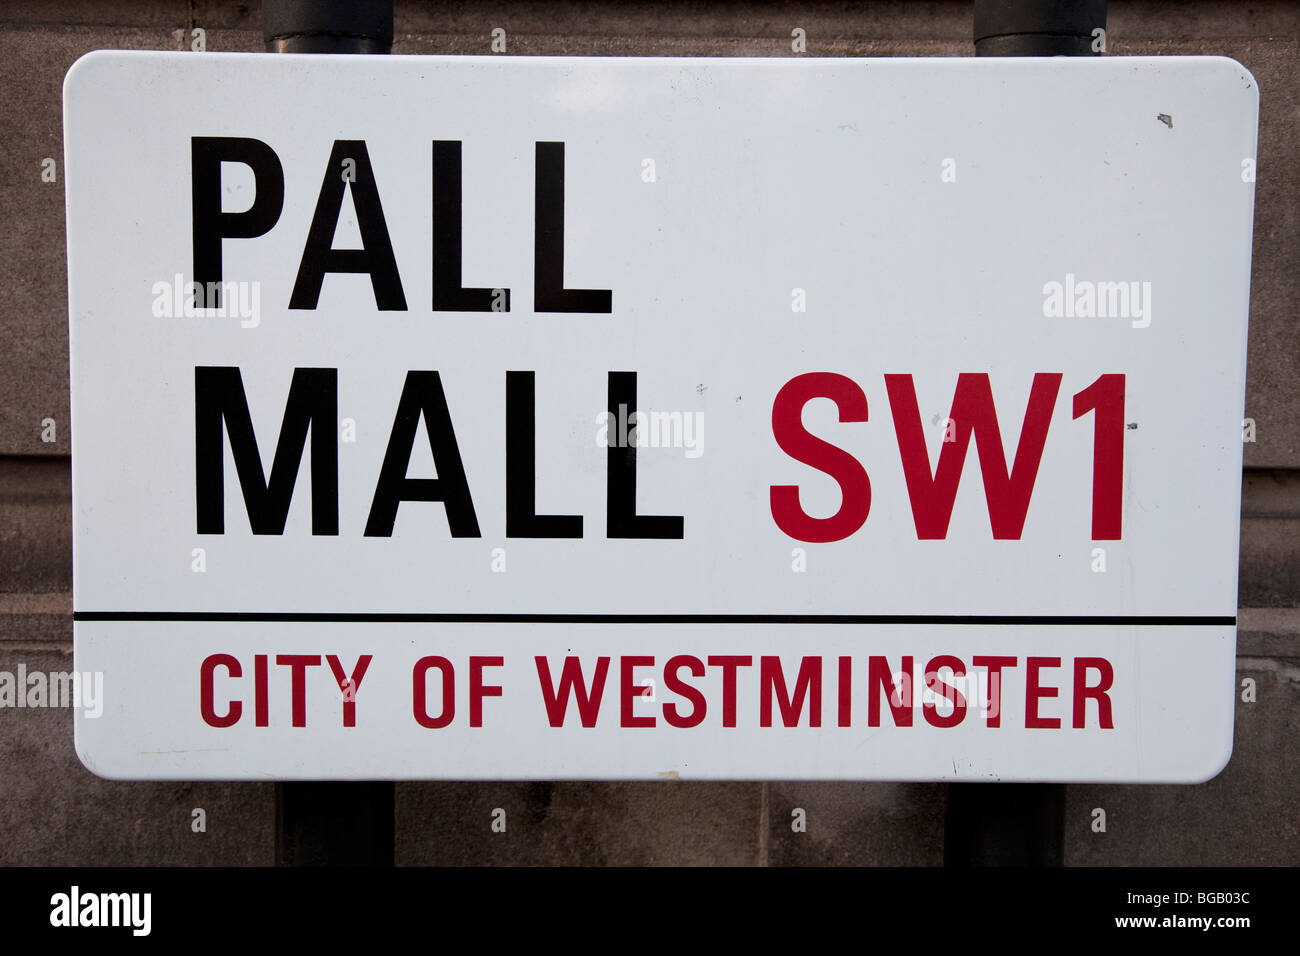 Street sign for Pall Mall, SW1, London. Stock Photo